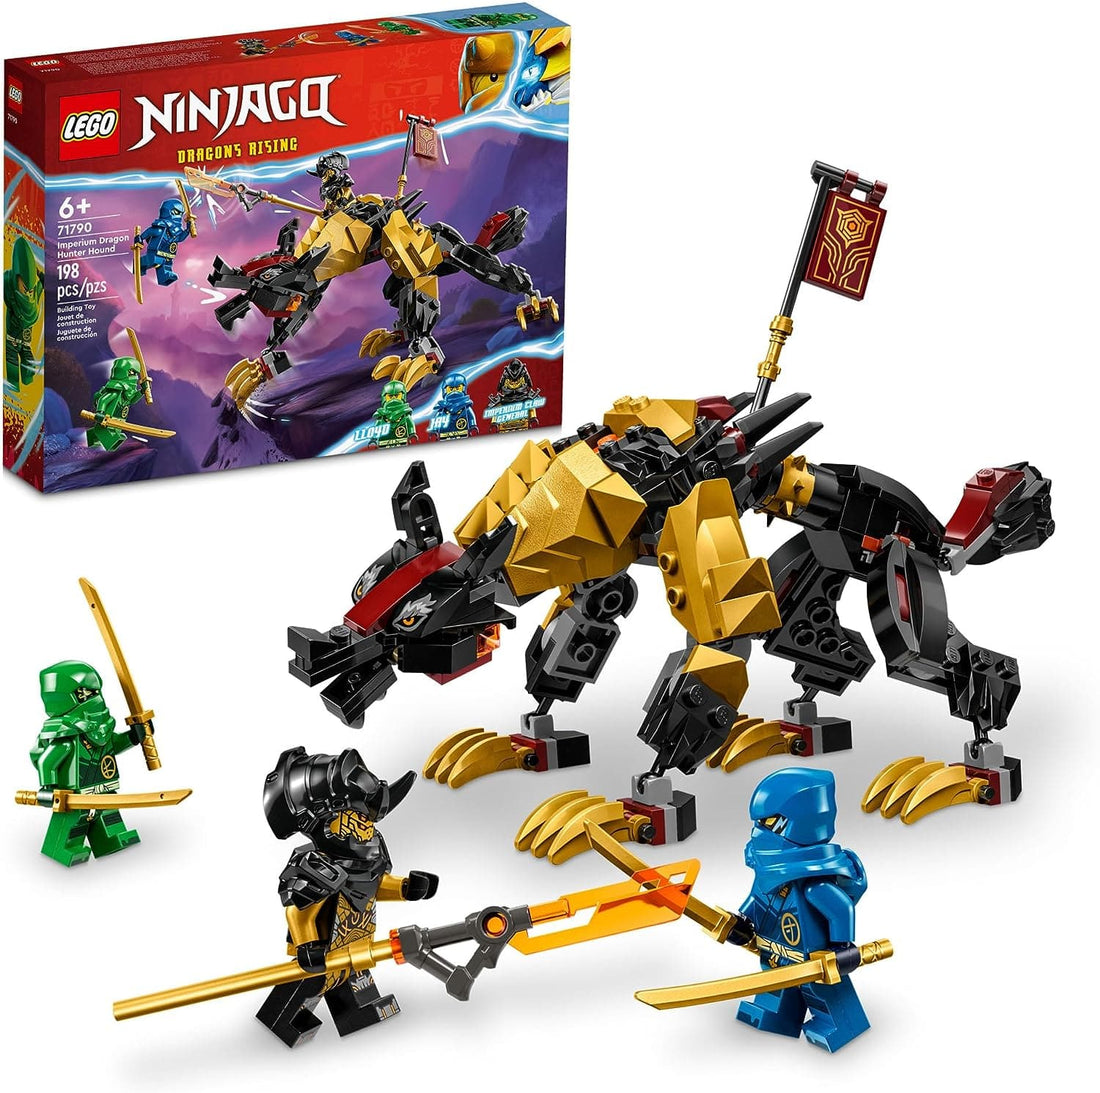 LEGO NINJAGO Imperium Dragon Hunter Hound Building Set with Monster and Dragon Toys and 3 Minifigures, - best price from Maltashopper.com 71790